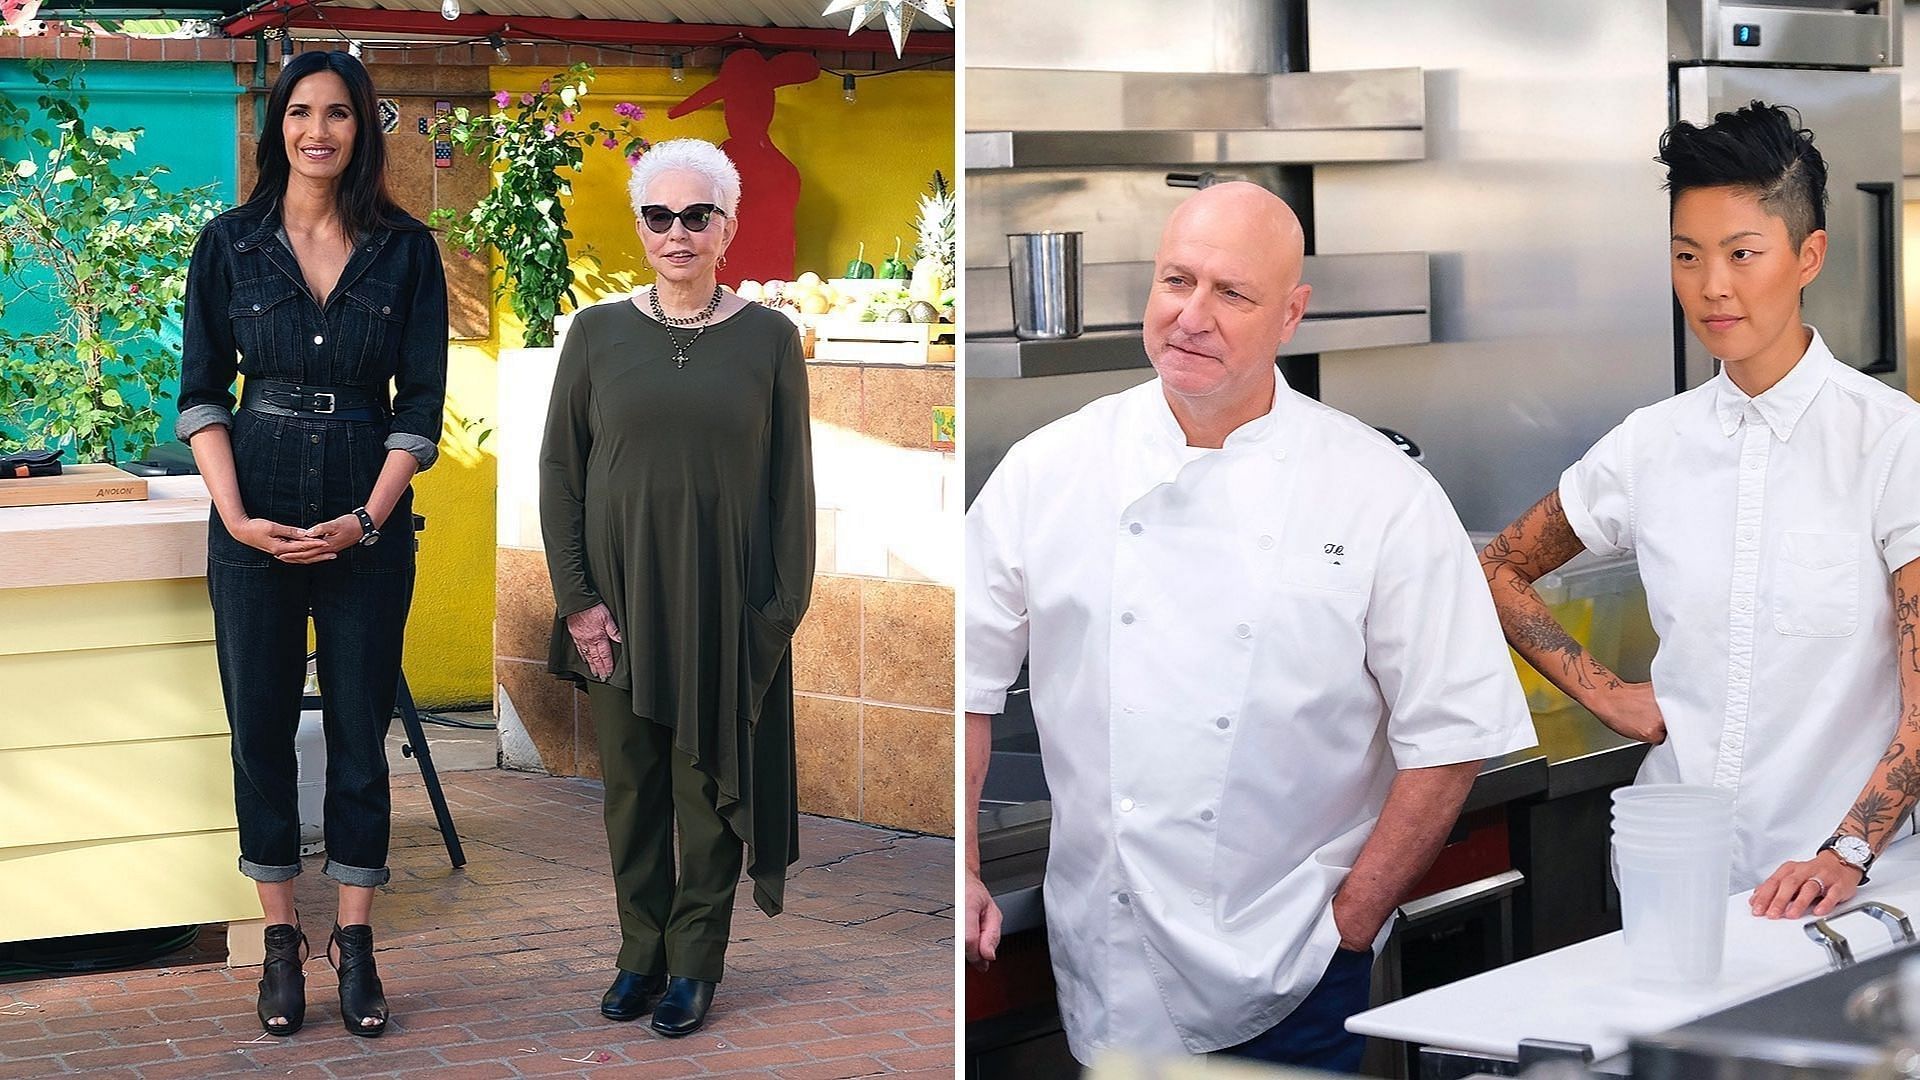 Contestants on Top Chef cook with Carne Secca as the judges look on (Image via bravotopchef/Instagram)